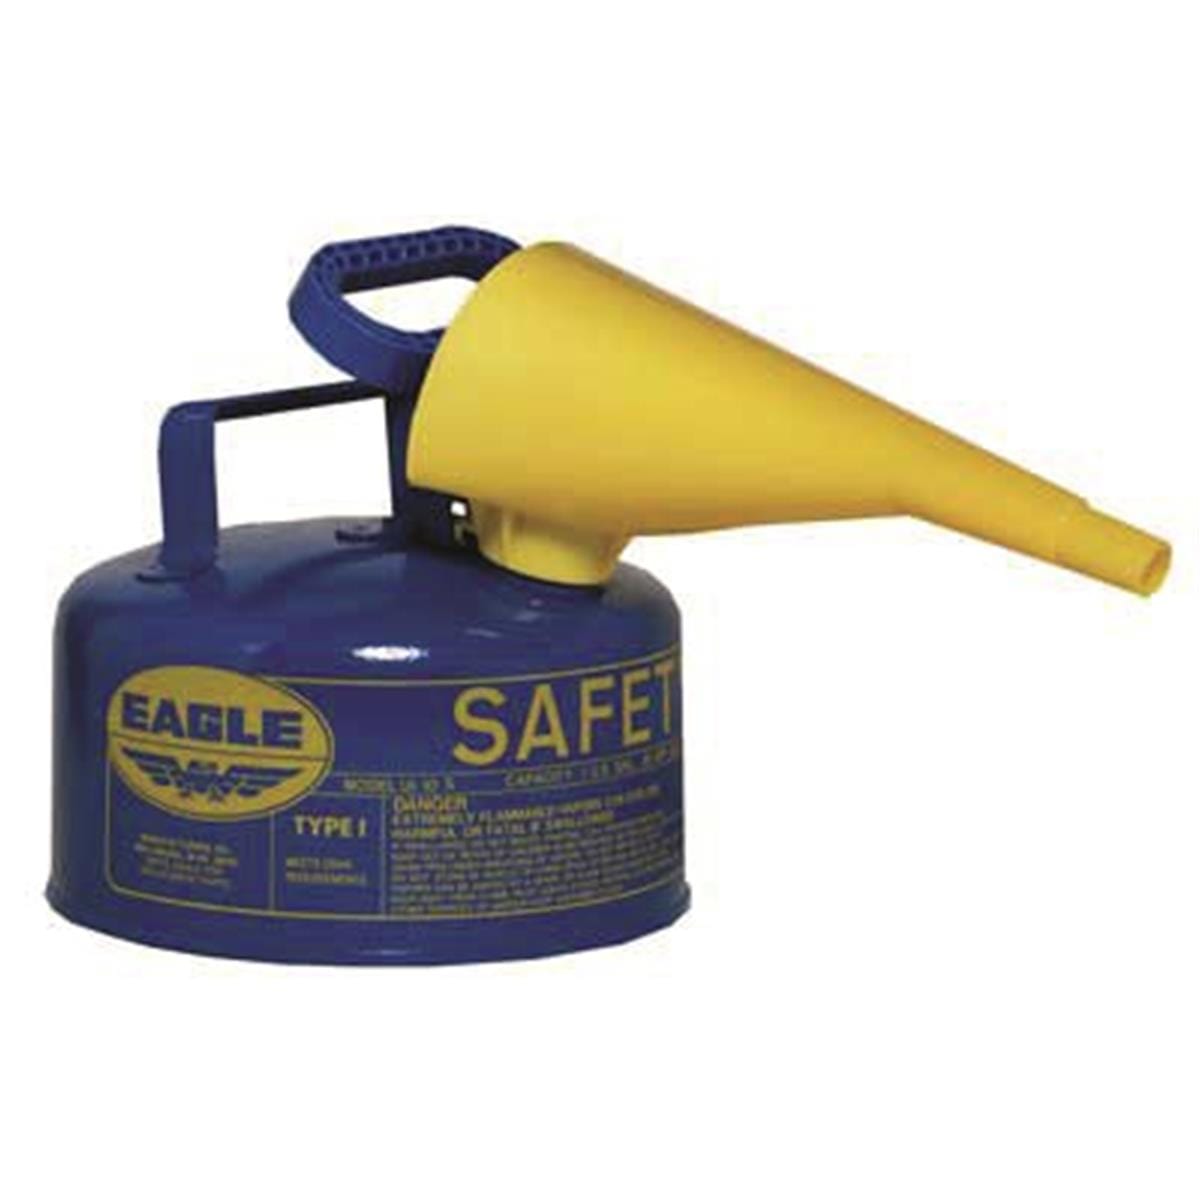 Type I Safety Can, 1 gal.